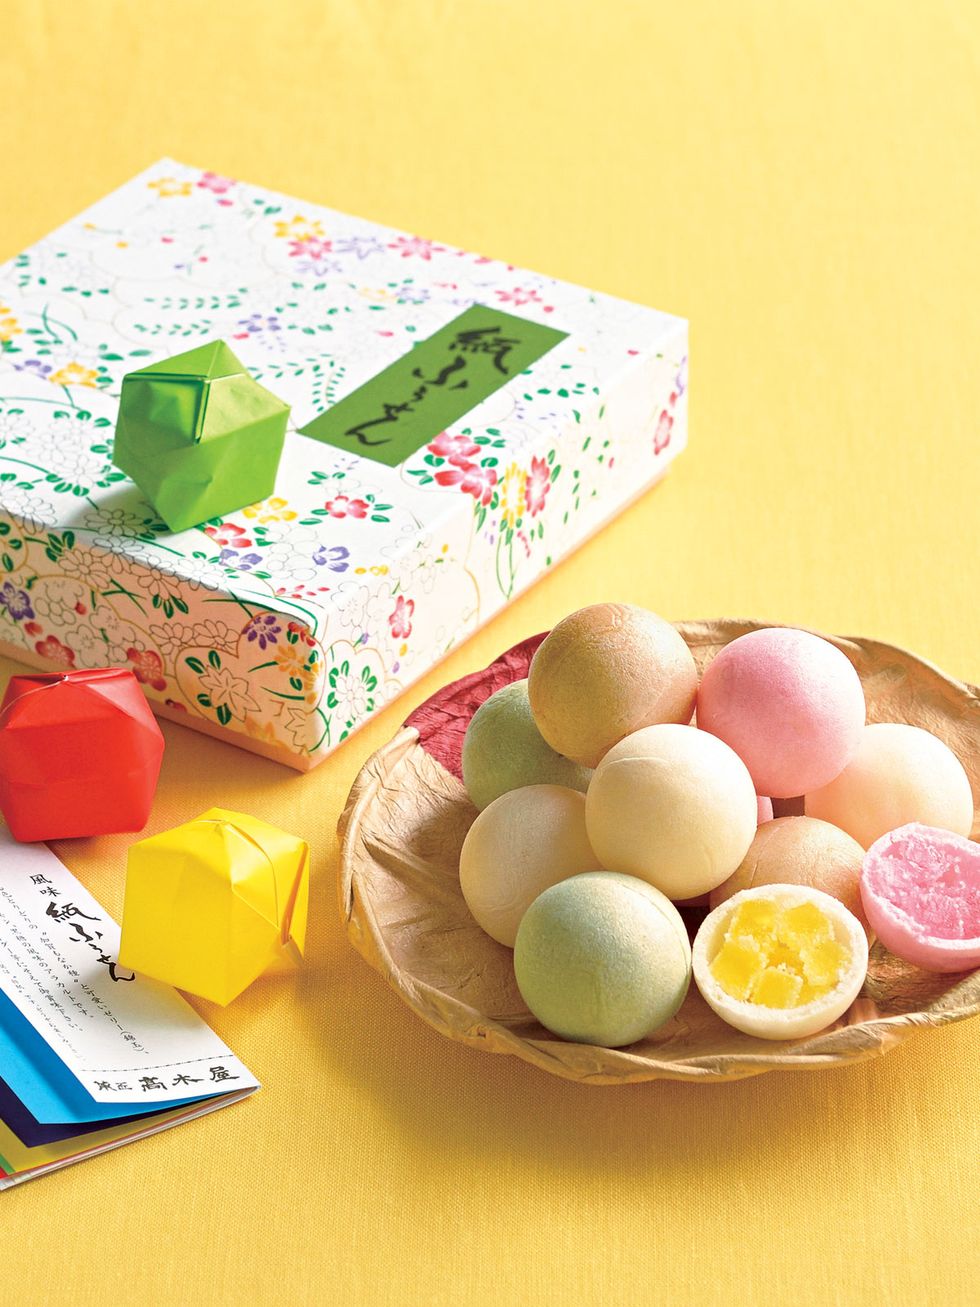 Ingredient, Egg, Egg, Paper product, Boiled egg, Peach, Box, Packing materials, Gift wrapping, Egg white, 